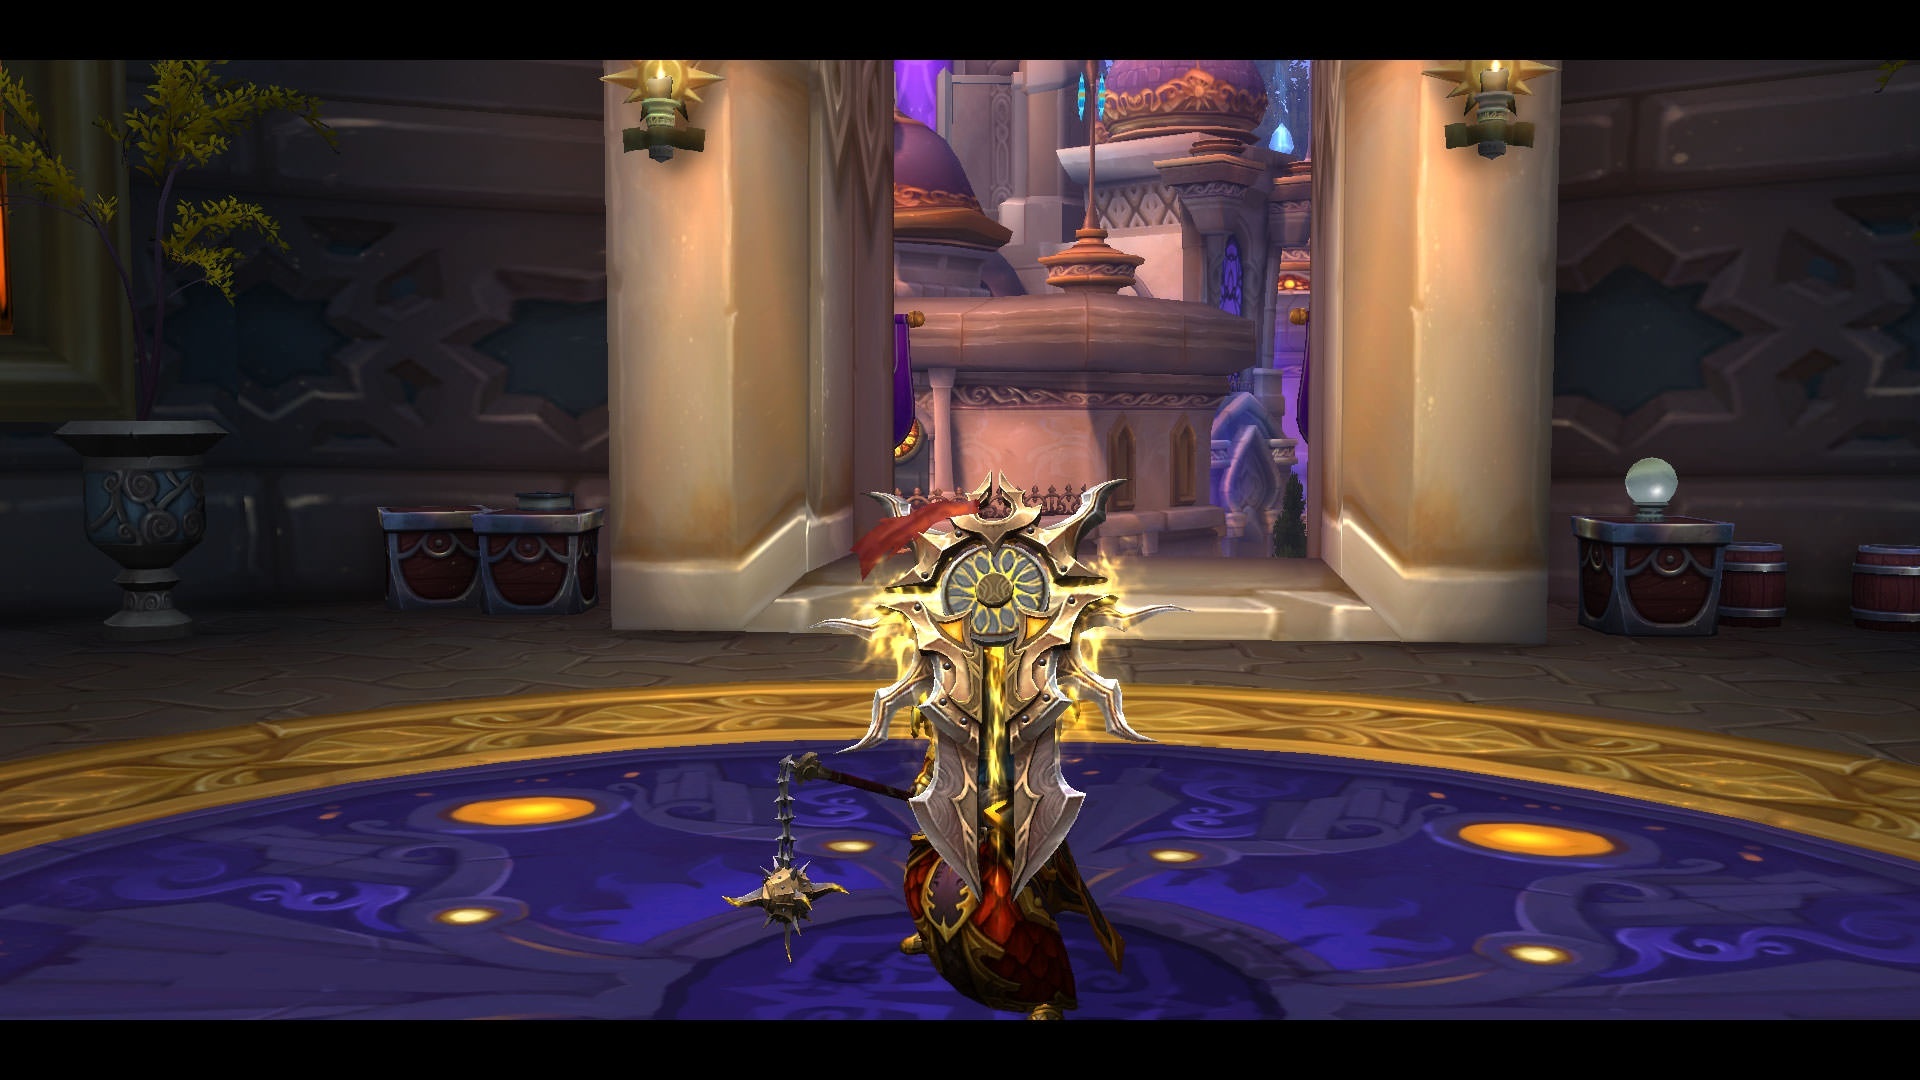 mage challenge frost mage tower wow